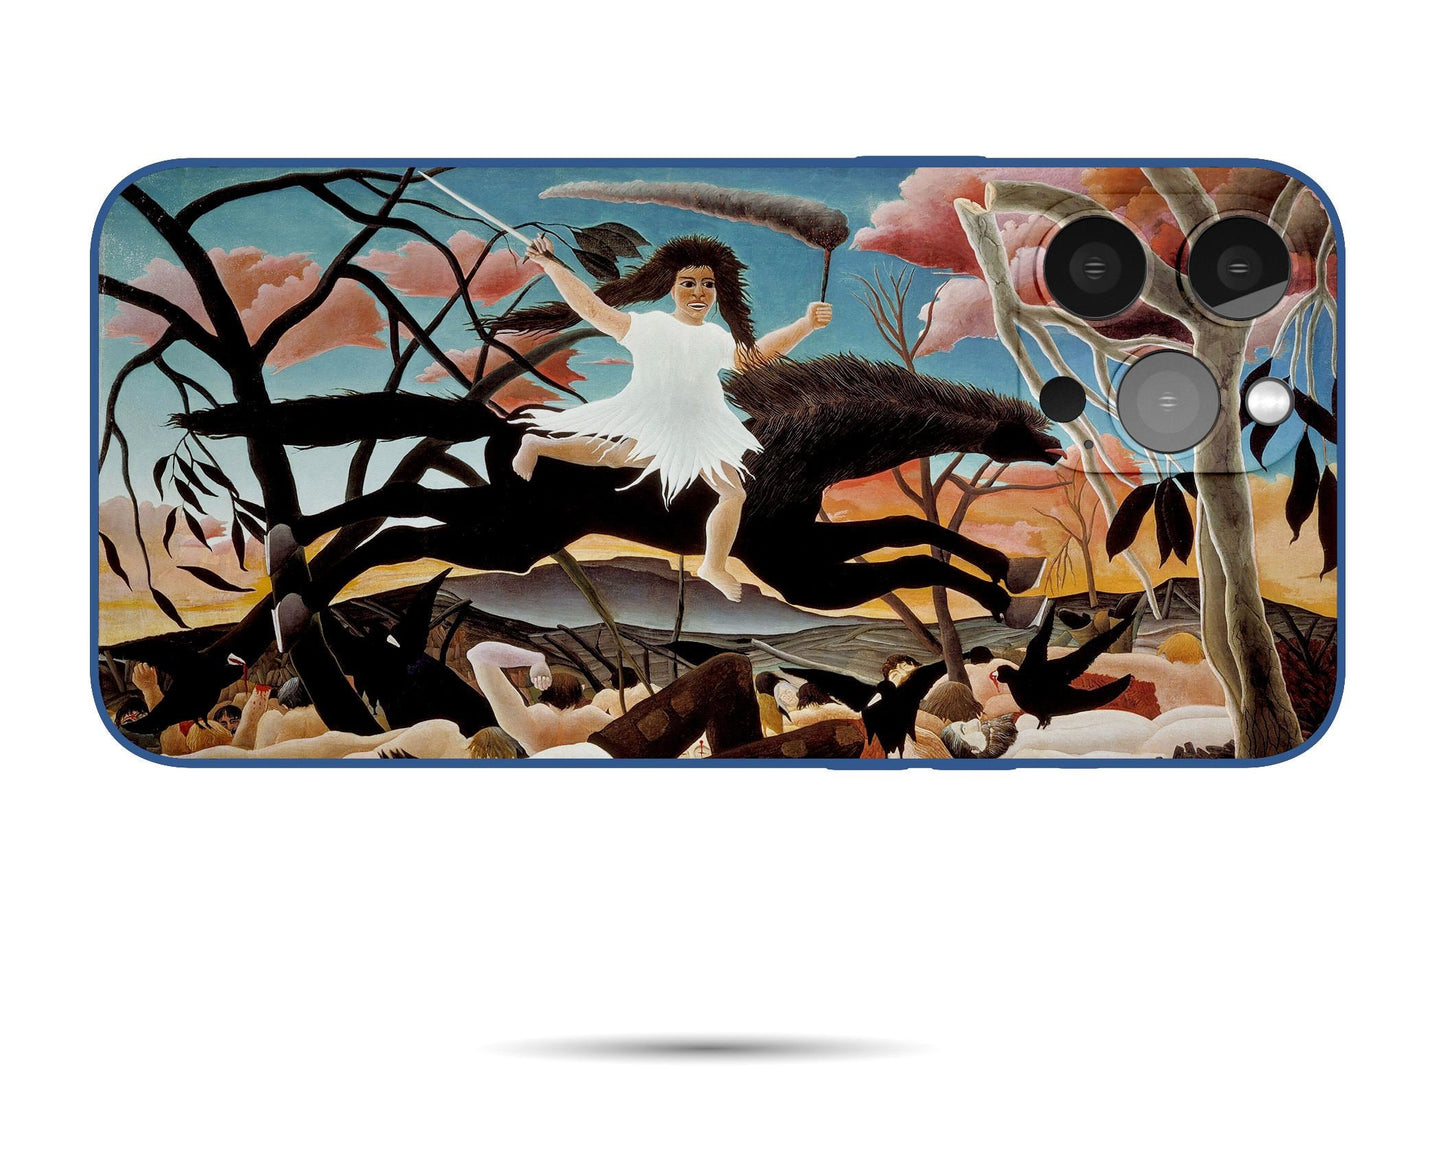 Iphone 14 Case Of Henri Rousseau Famous Painting, Iphone Case, Iphone 12 Mini Case, Aesthetic Phone Case, Gift For Her, Iphone Case Silicone